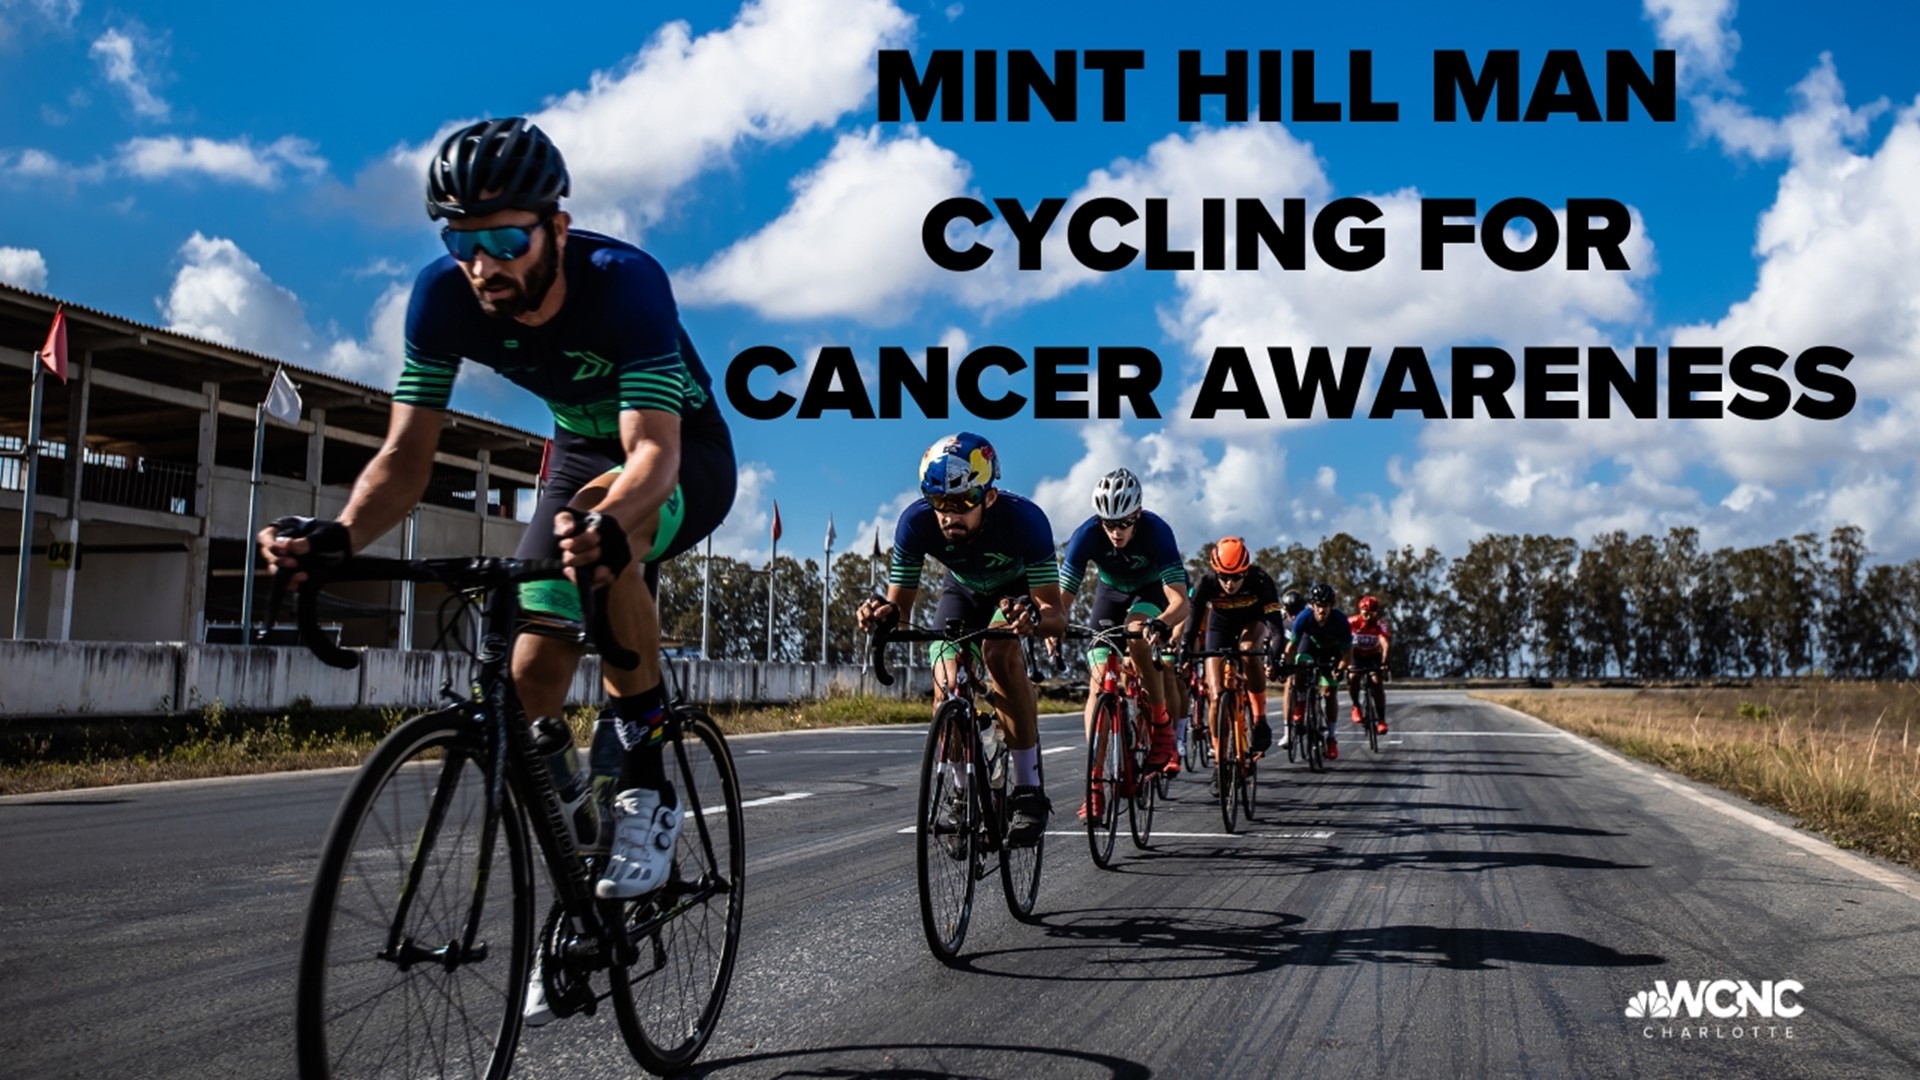 Mint Hill man cycling cross-country for cancer awareness